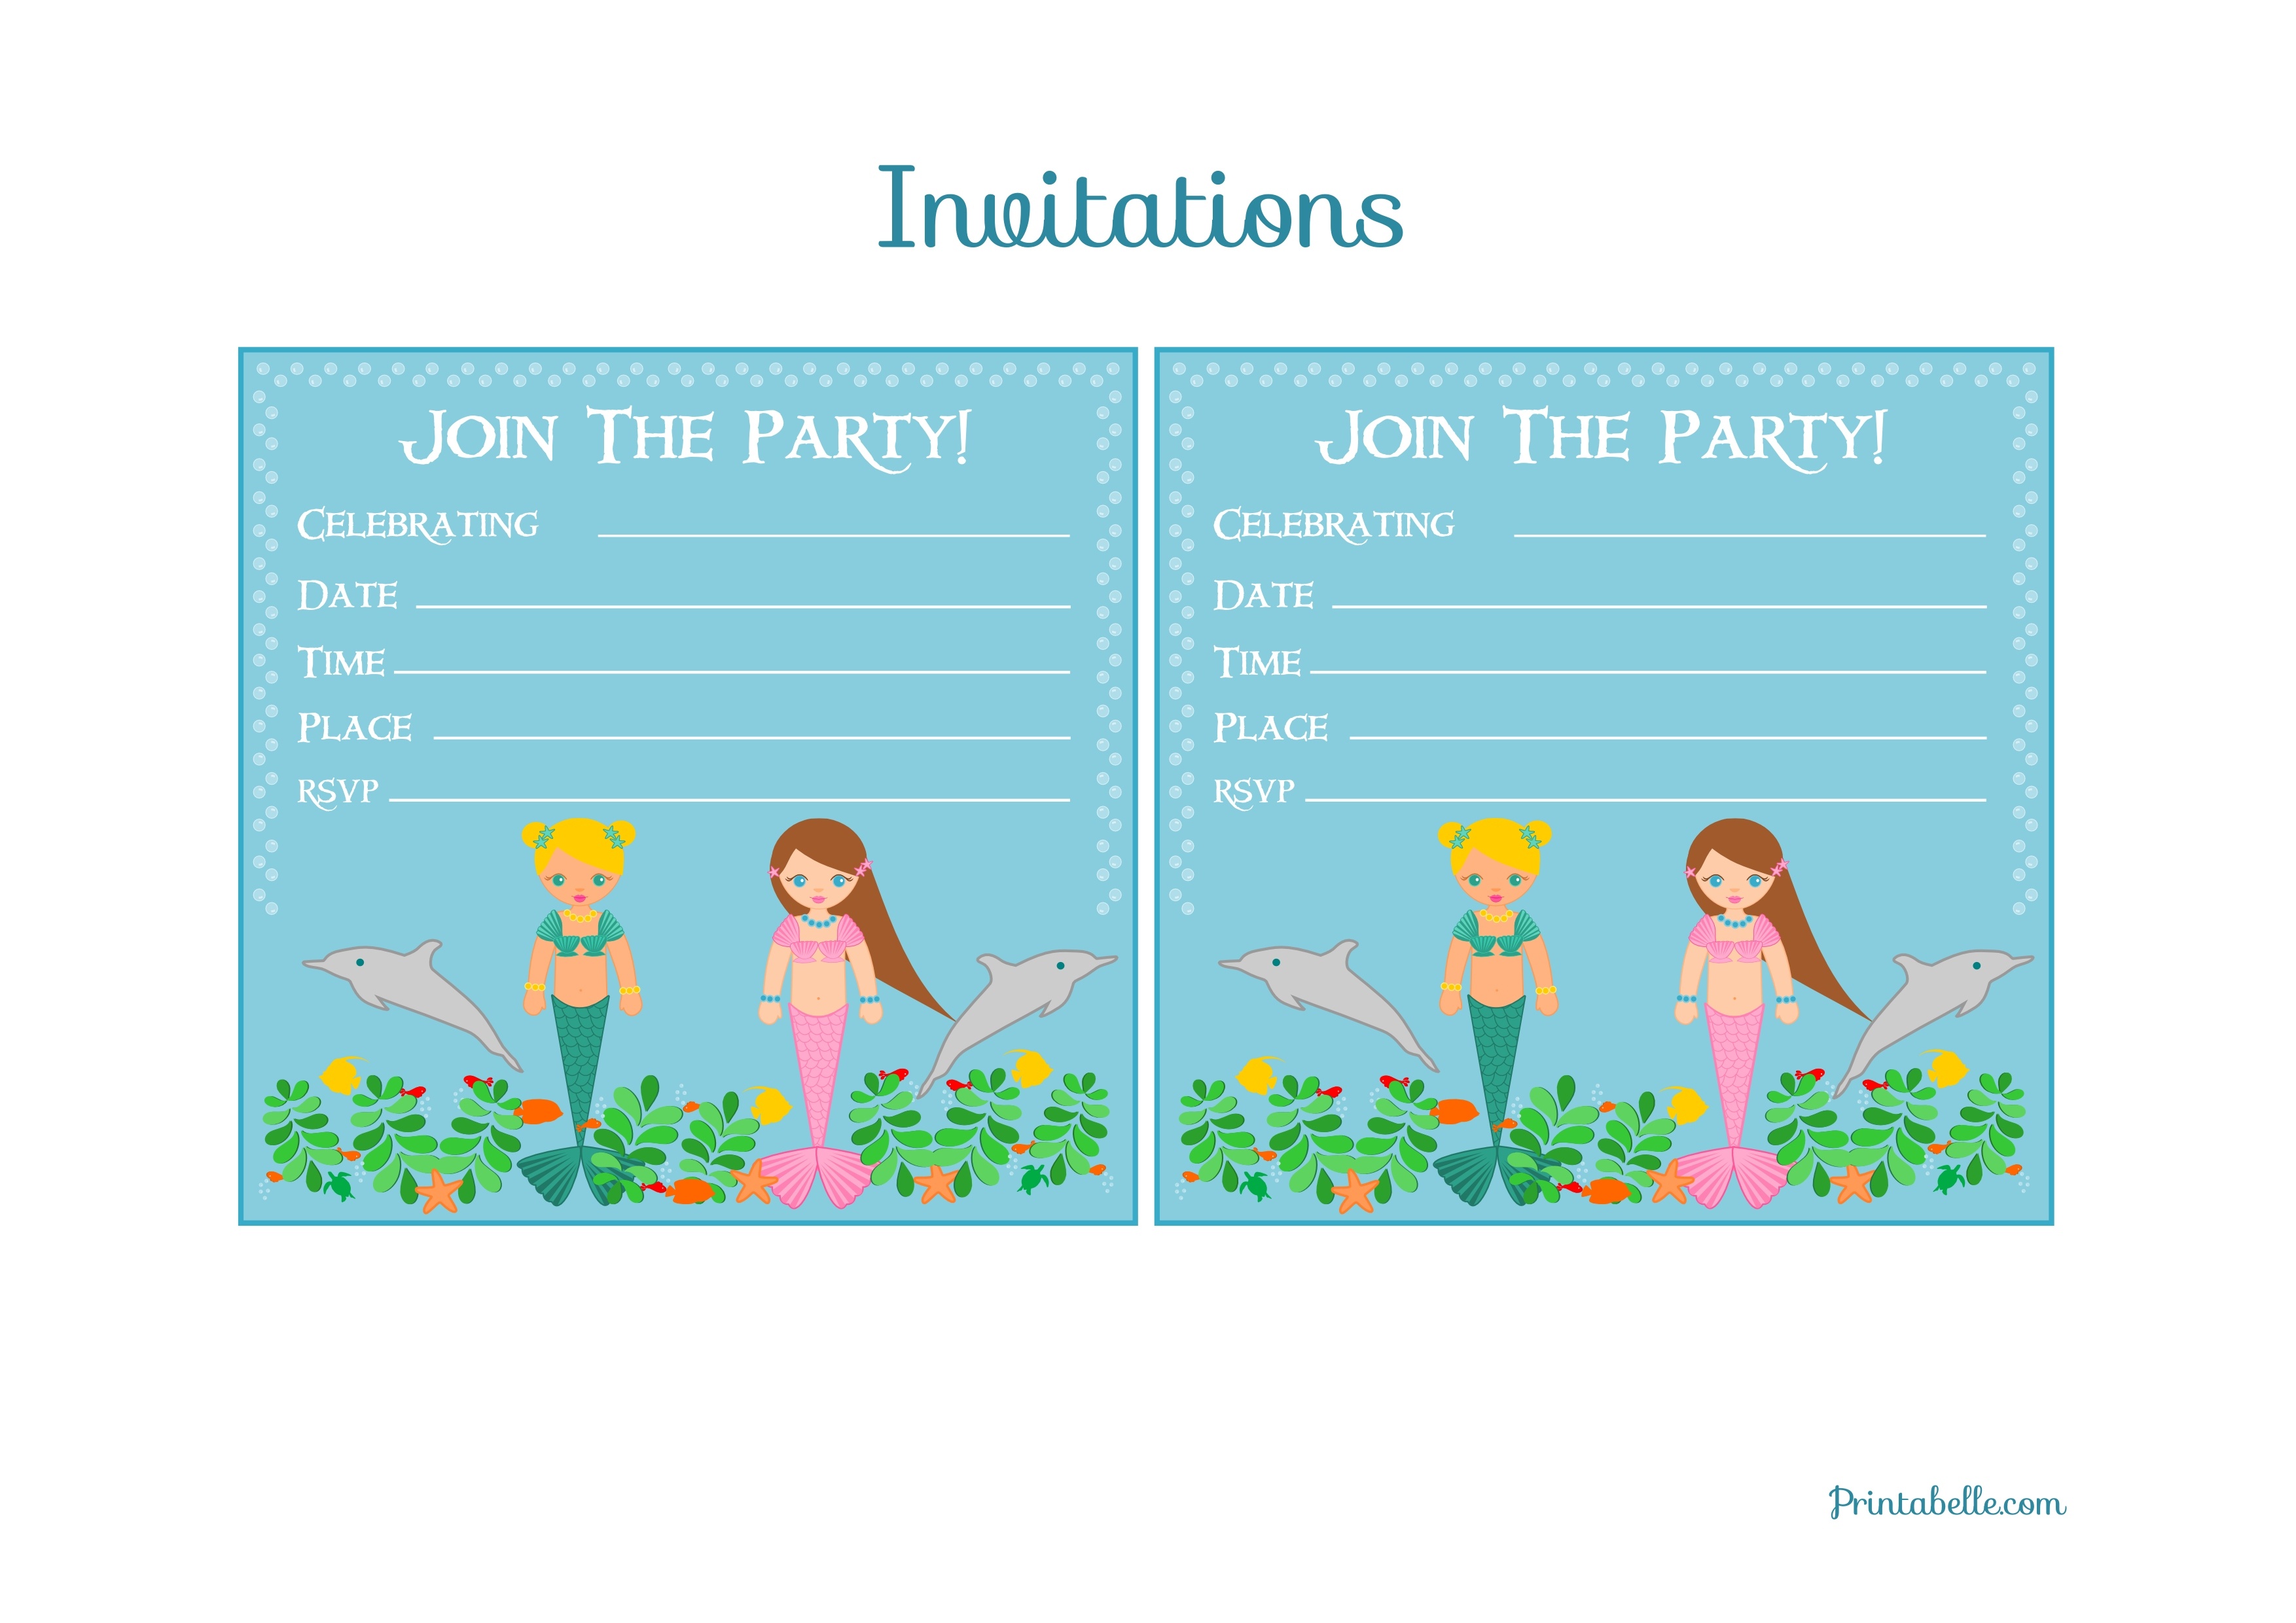 Free Mermaid Birthday Party Printables From Printabelle | Catch My Party - Free Printable Mermaid Invitations